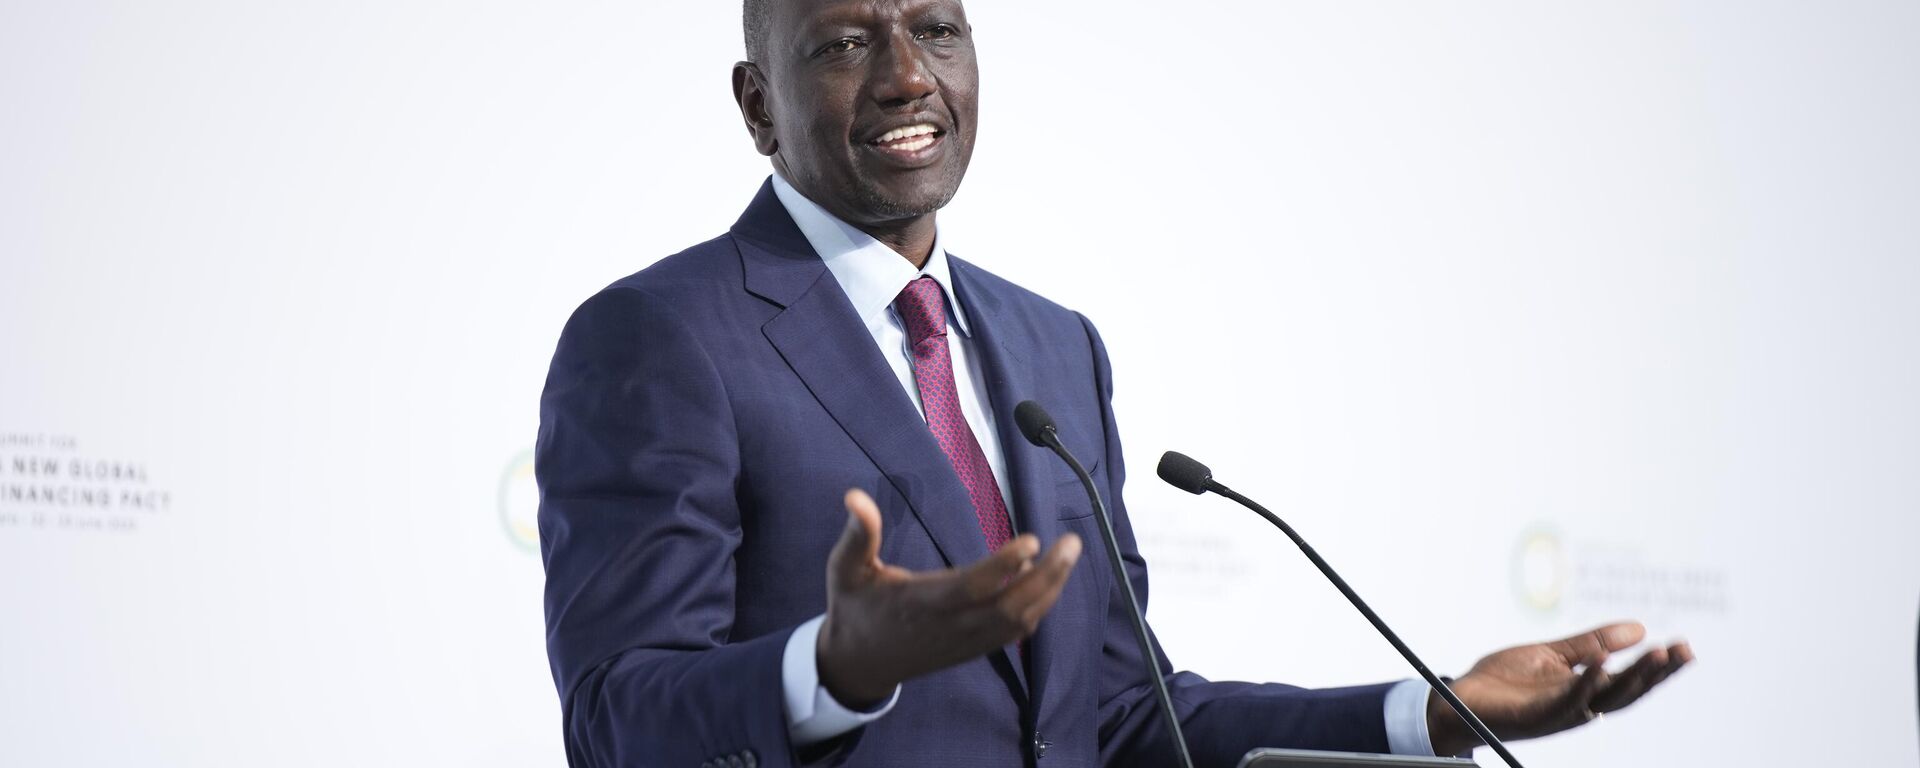 William Ruto, President of Kenya, speaks during a joint press conference with Kristalina Georgieva, President of the International Monetary Fund, French President Emmanuel Macron, U.S. Treasury Secretary Janet Yellen and World Bank President Ajay Banga at the end of the New Global Financial Pact Summit, Friday, June 23, 2023 in Paris. - Sputnik Africa, 1920, 23.06.2023